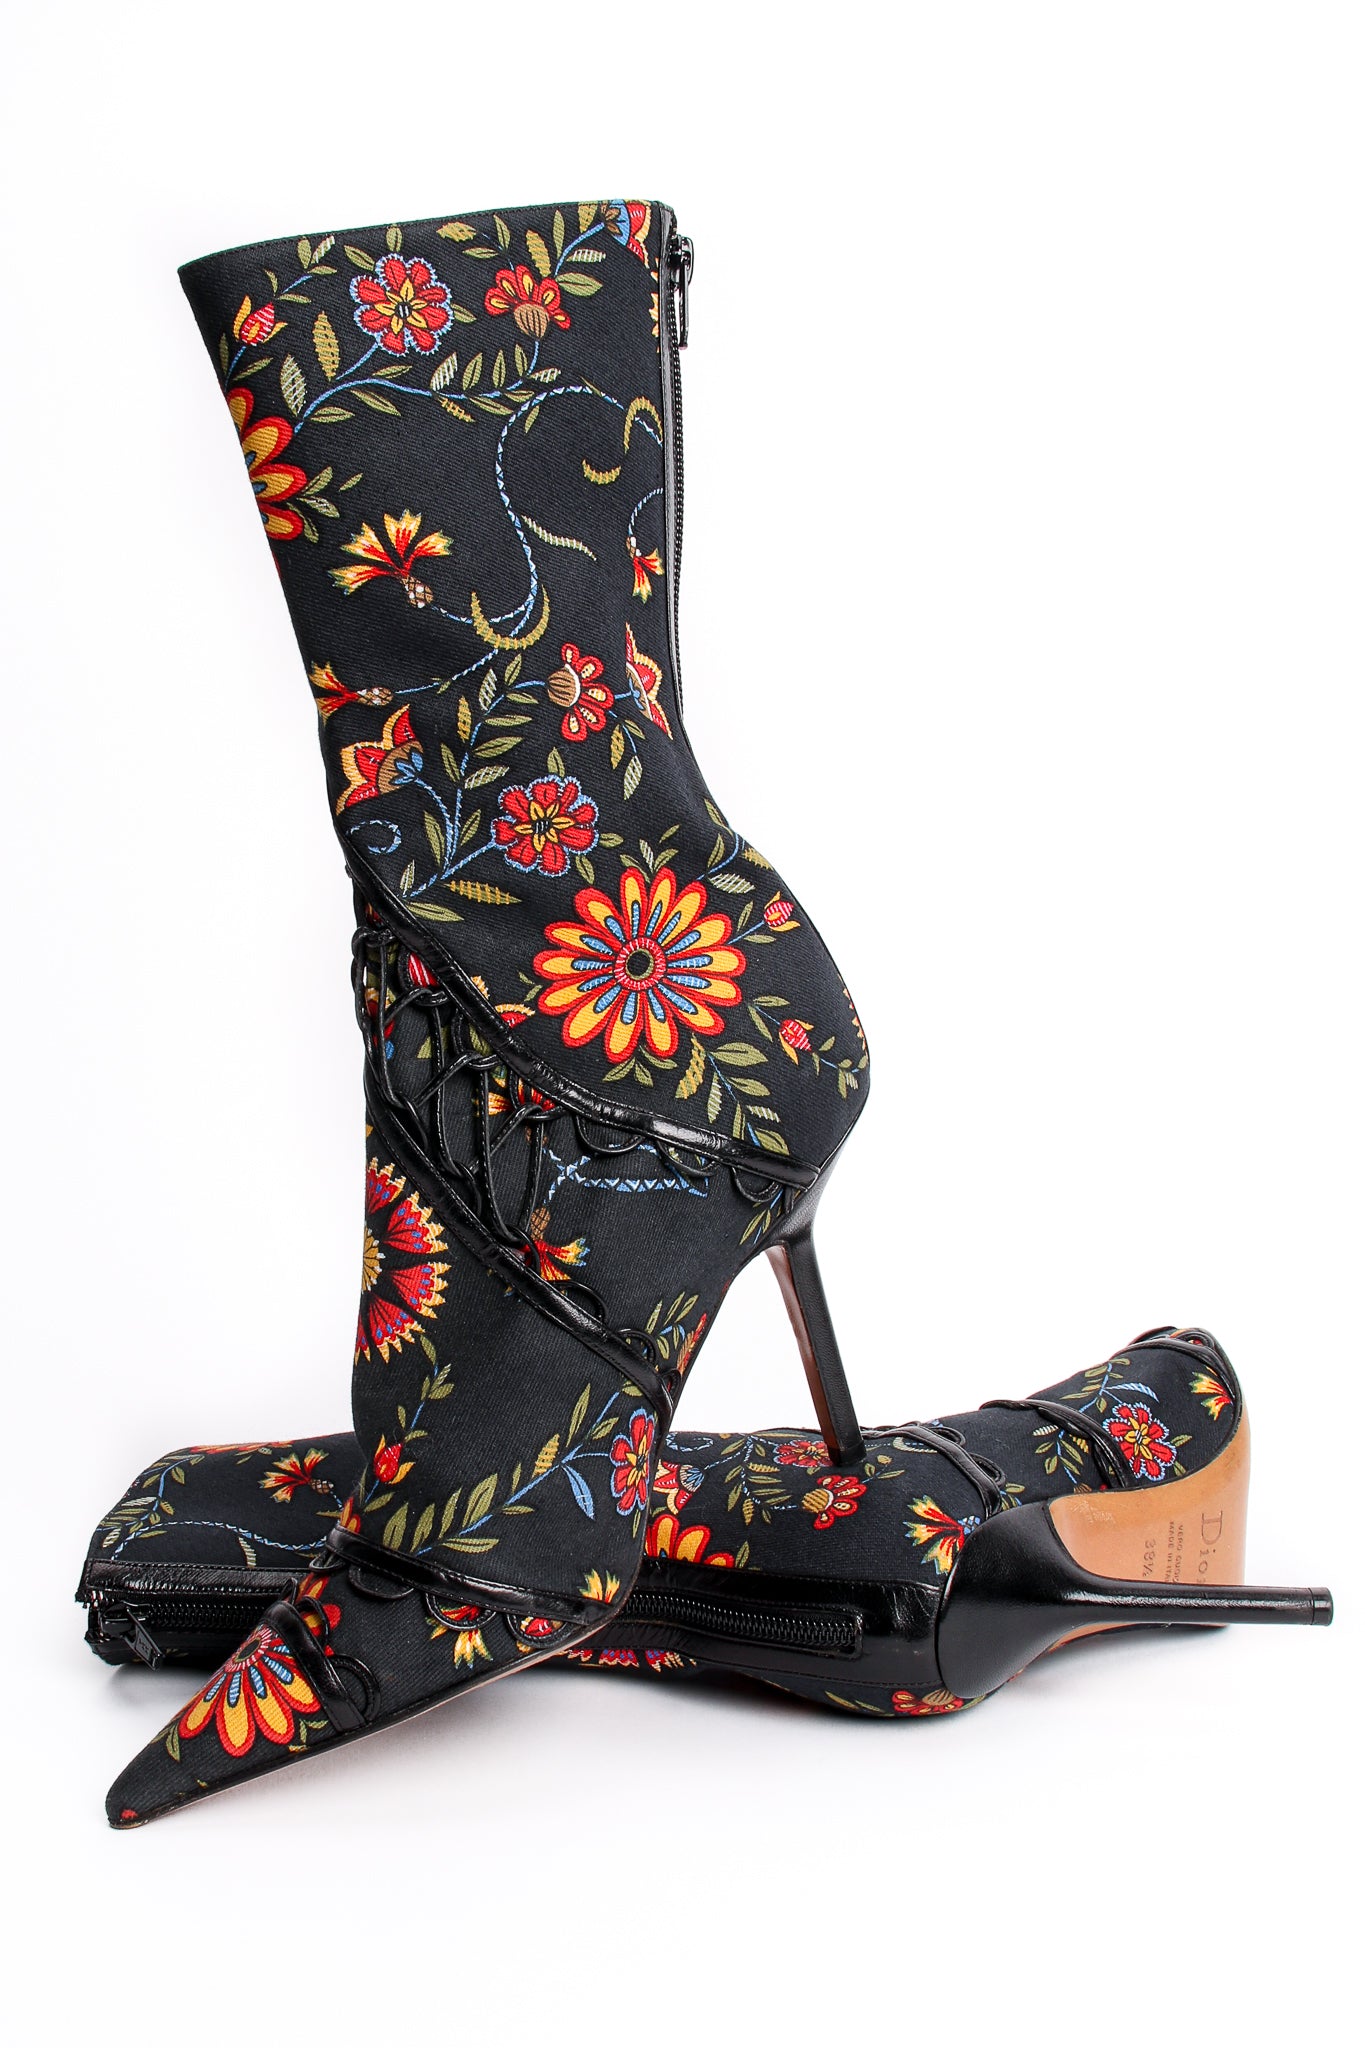 Vintage Christian Dior Floral Print Stiletto Boots at Recess Los Angeles